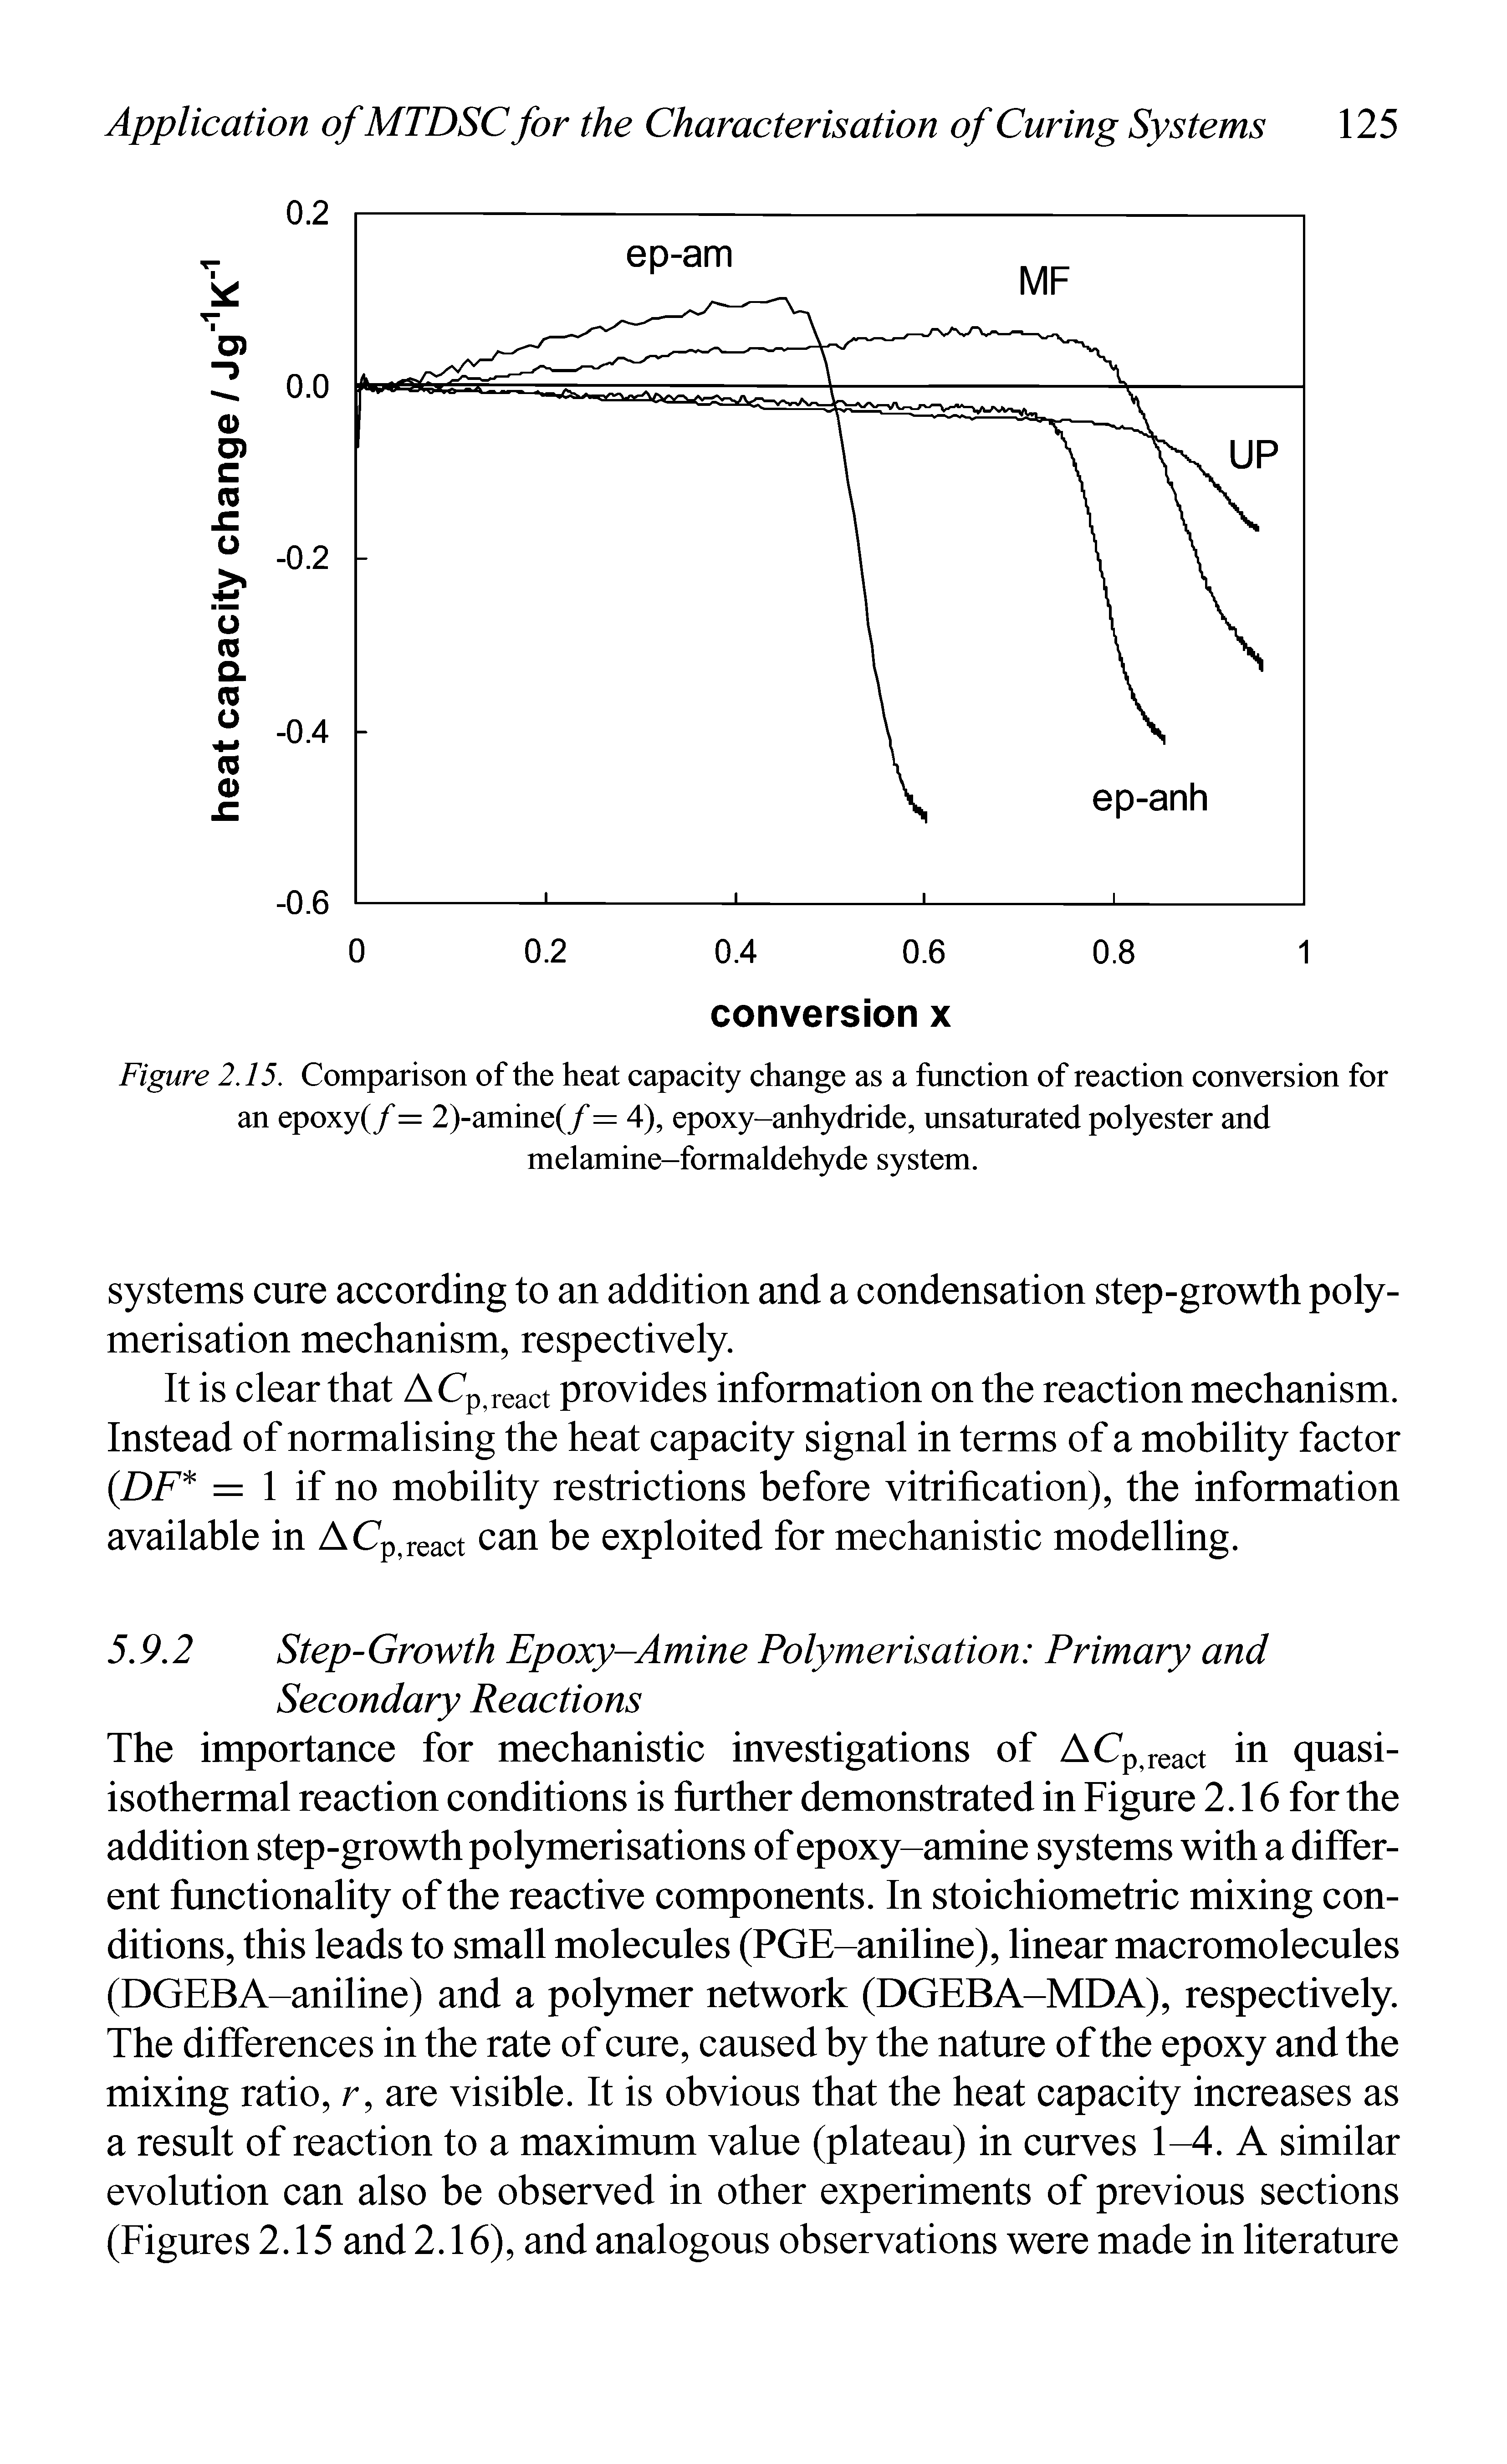 Figure 2.15. Comparison of the heat capacity change as a function of reaction conversion for an epoxy(/ = 2)-amine(/ = 4), epoxy-anhydride, unsaturated polyester and melamine-formaldehyde system.